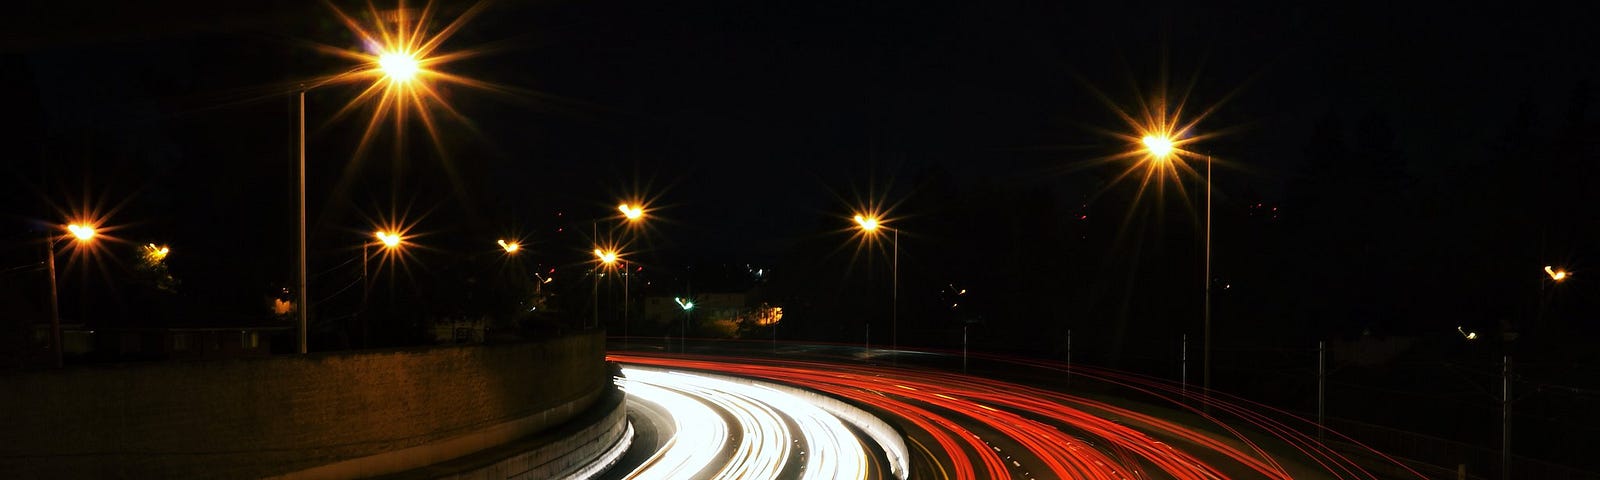 Long exposure image of a highway at night featuring red and white streaks of headlights merging into single rays of light above street lamps set against the night sky.